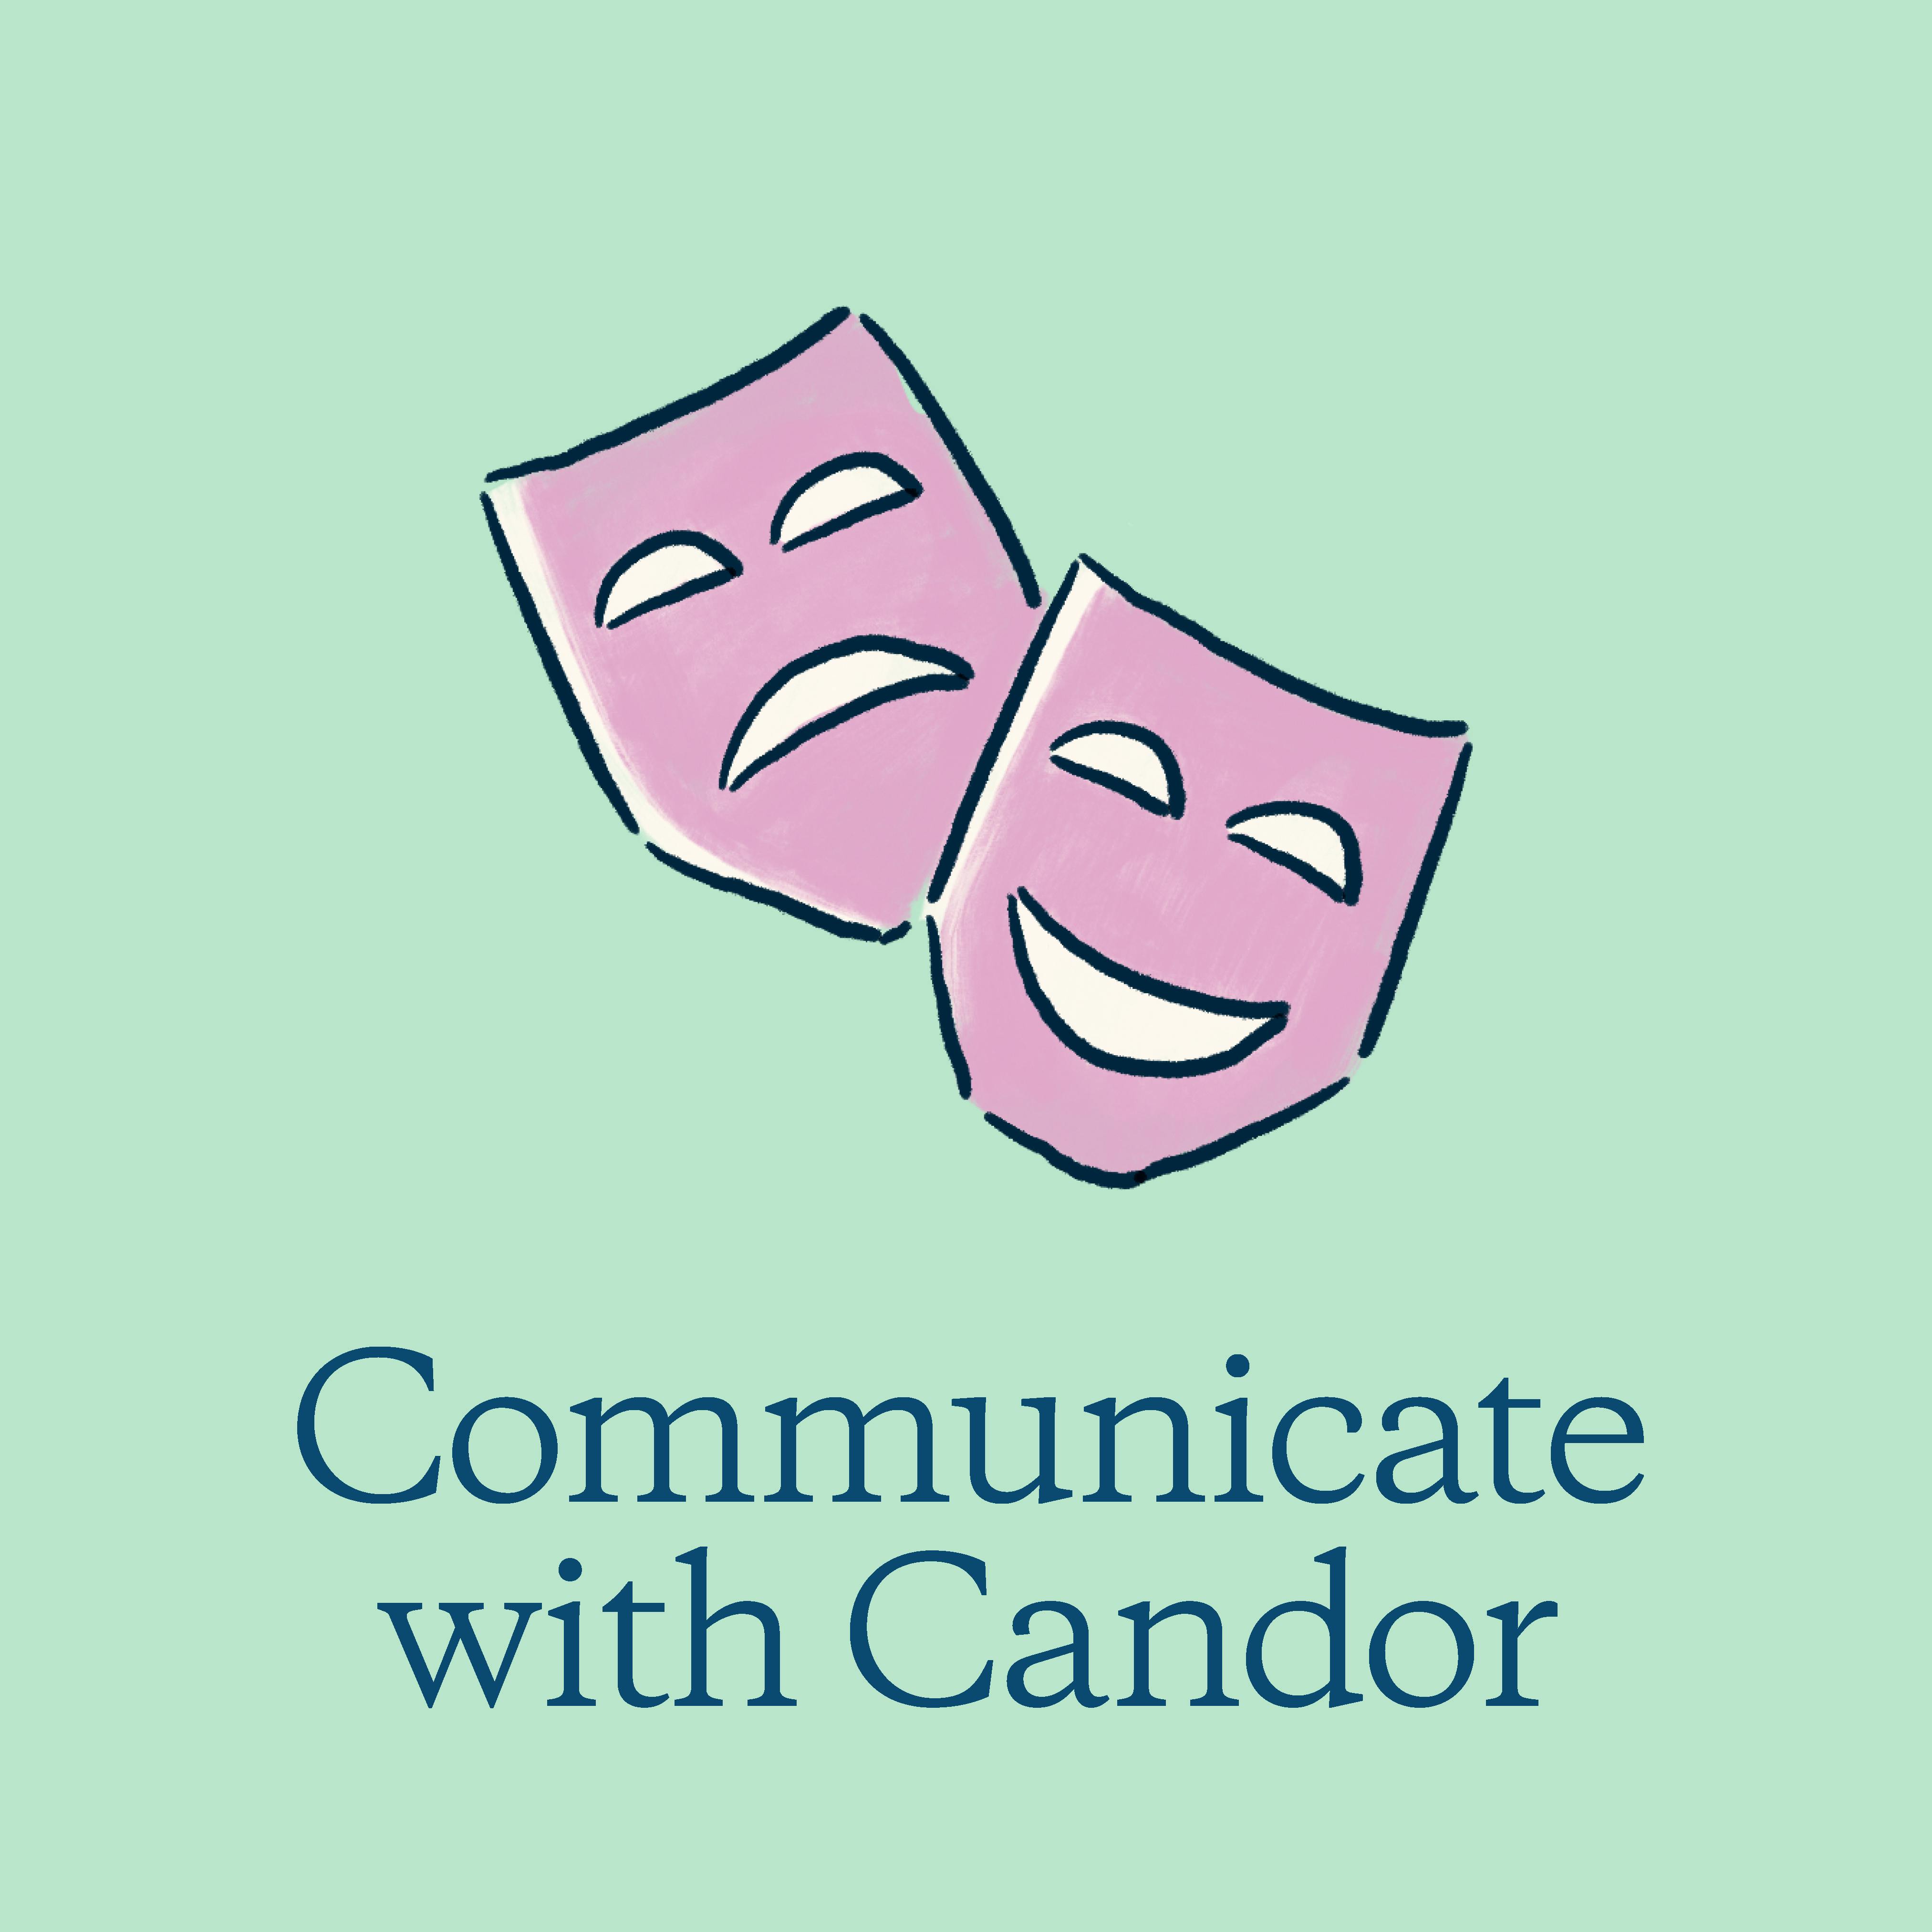 COMMUNICATE WITH CANDOR